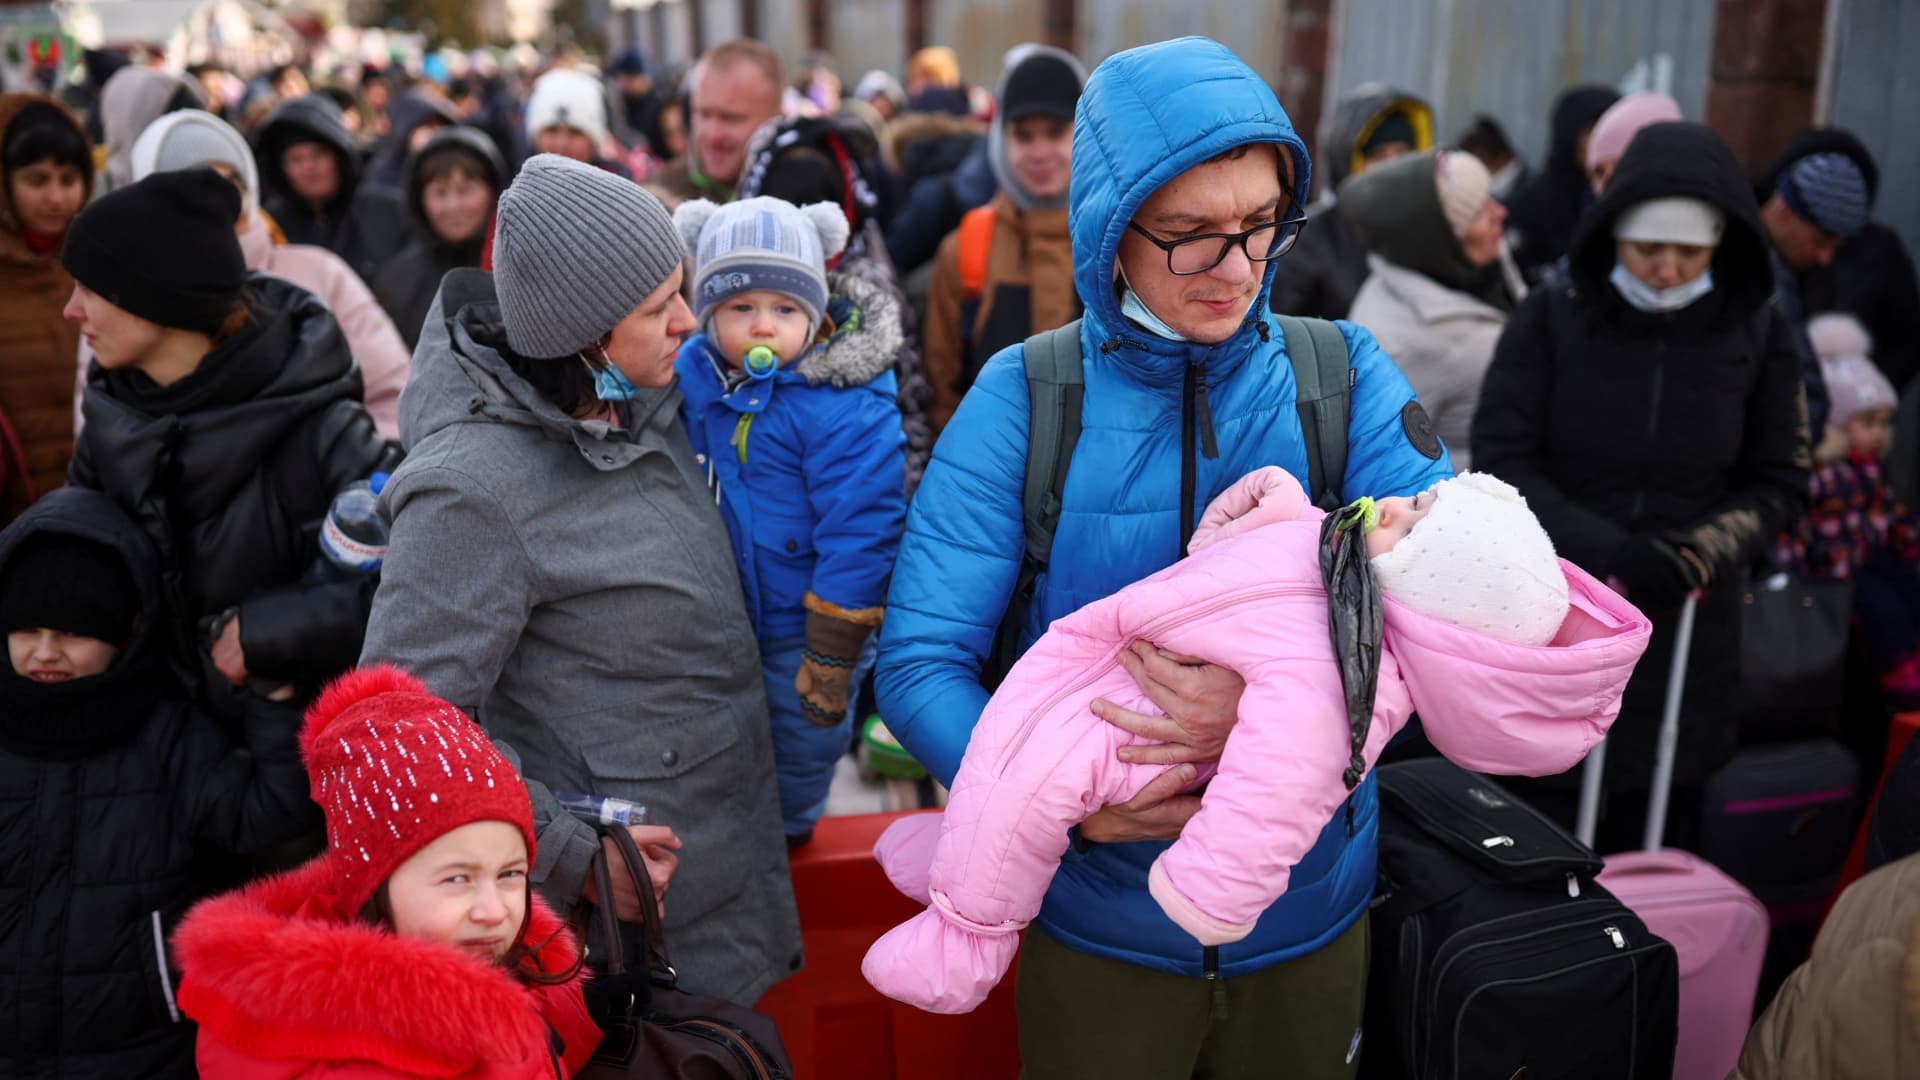 People who have fled Russia's invasion of Ukraine wait at the Shehyni border crossing to enter Poland, near Mostyska, Ukraine, on March 1, 2022.